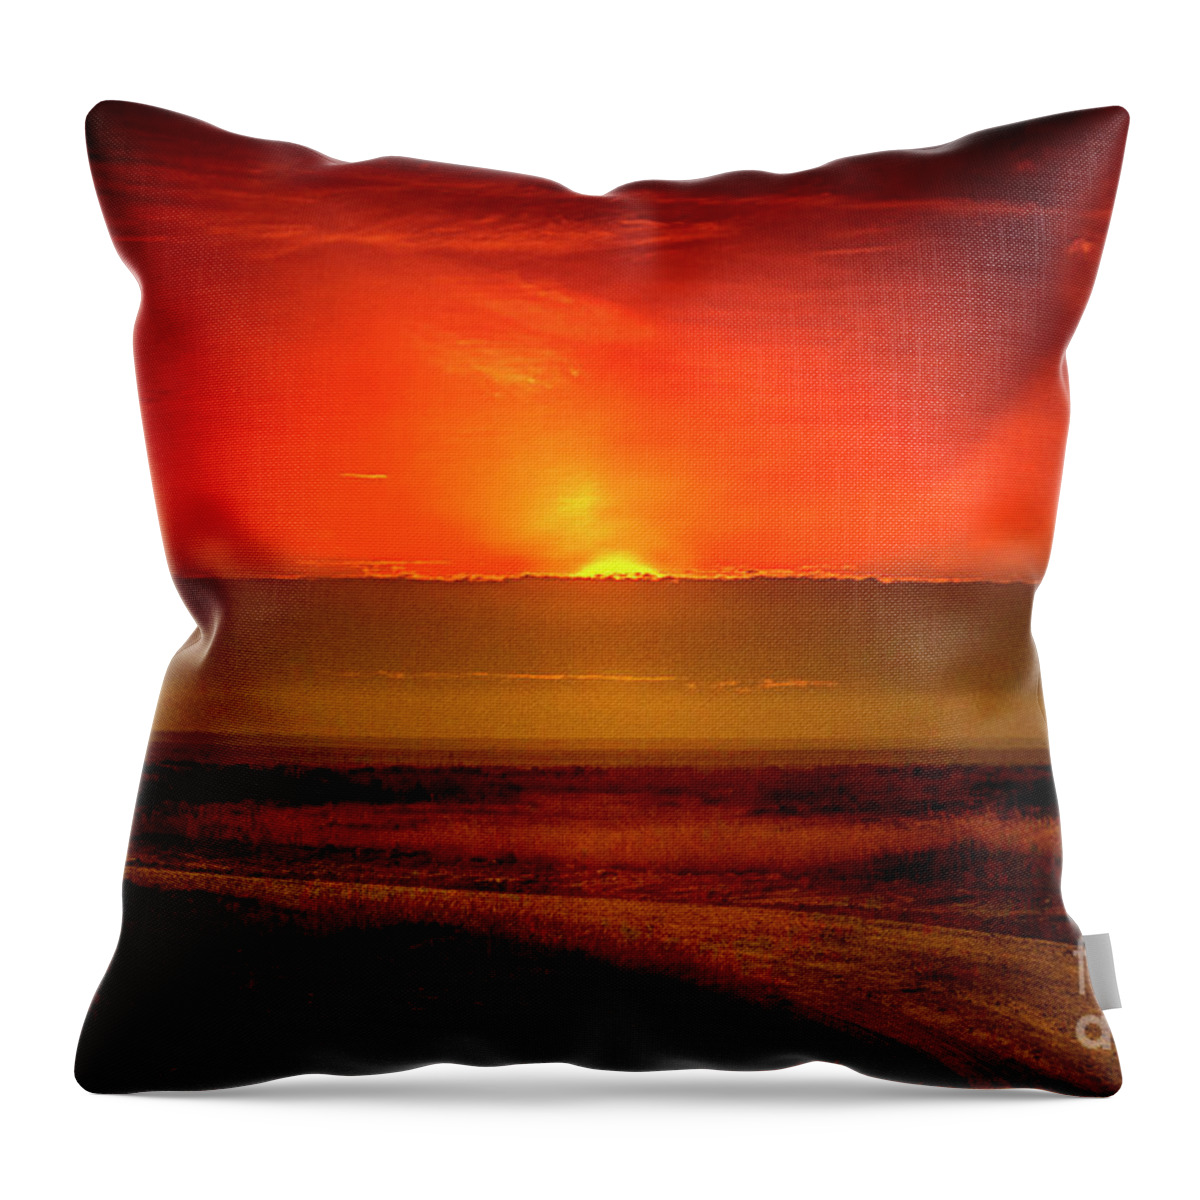 Sunrise Throw Pillow featuring the photograph Happy New Year by Pravine Chester